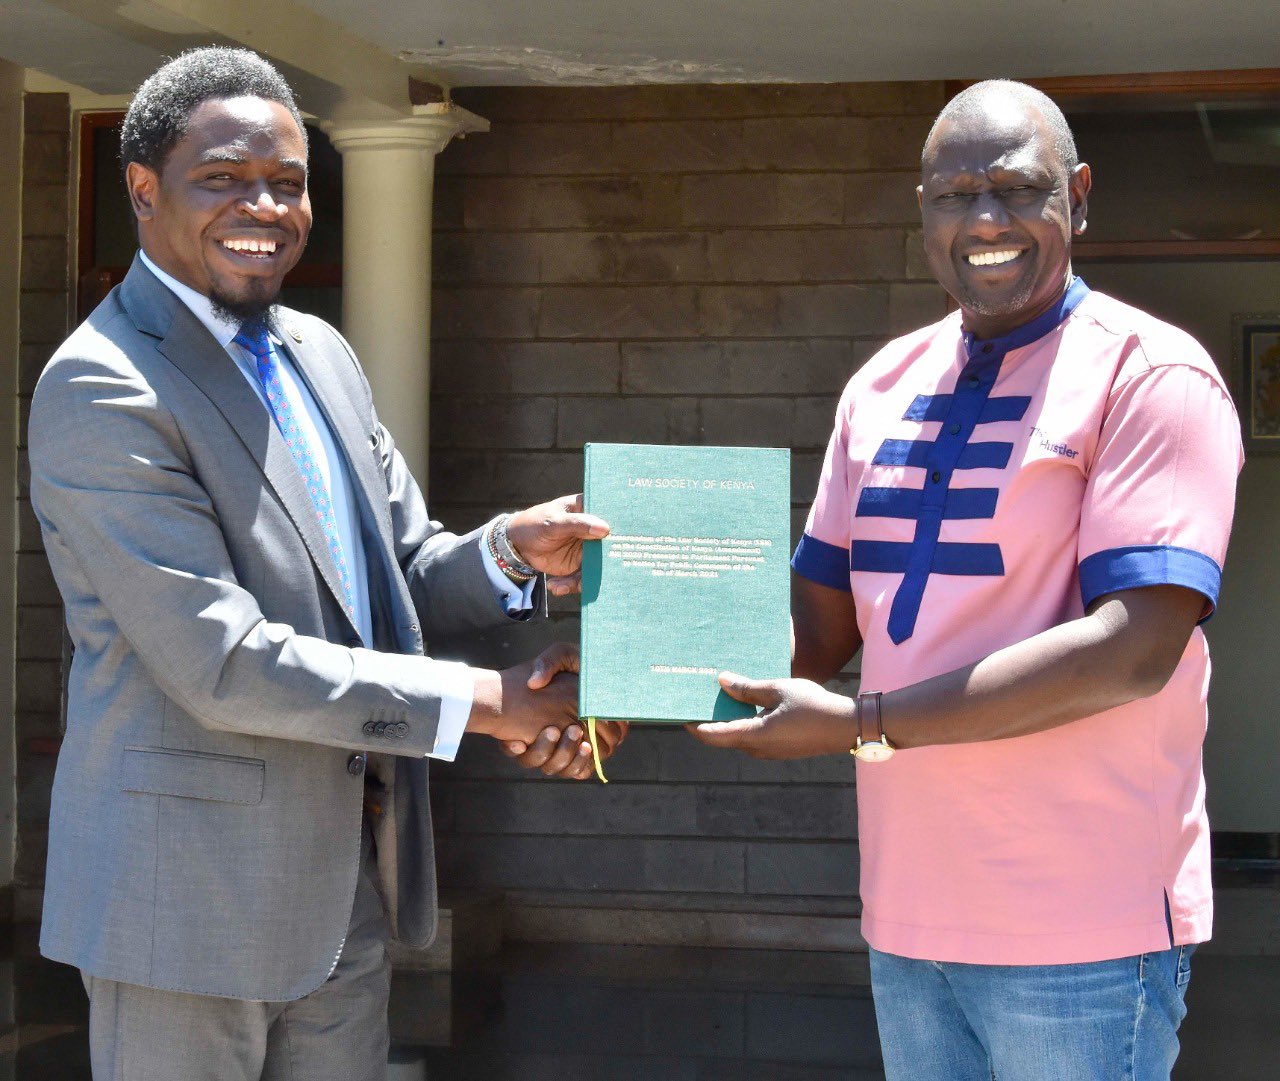 Deputy President William Ruto receives a copy of the memorandum sent to parliament in defence of the Constitution from LSK President Nelson Havi on August 27, 2021. |Courtesy| Twitter|